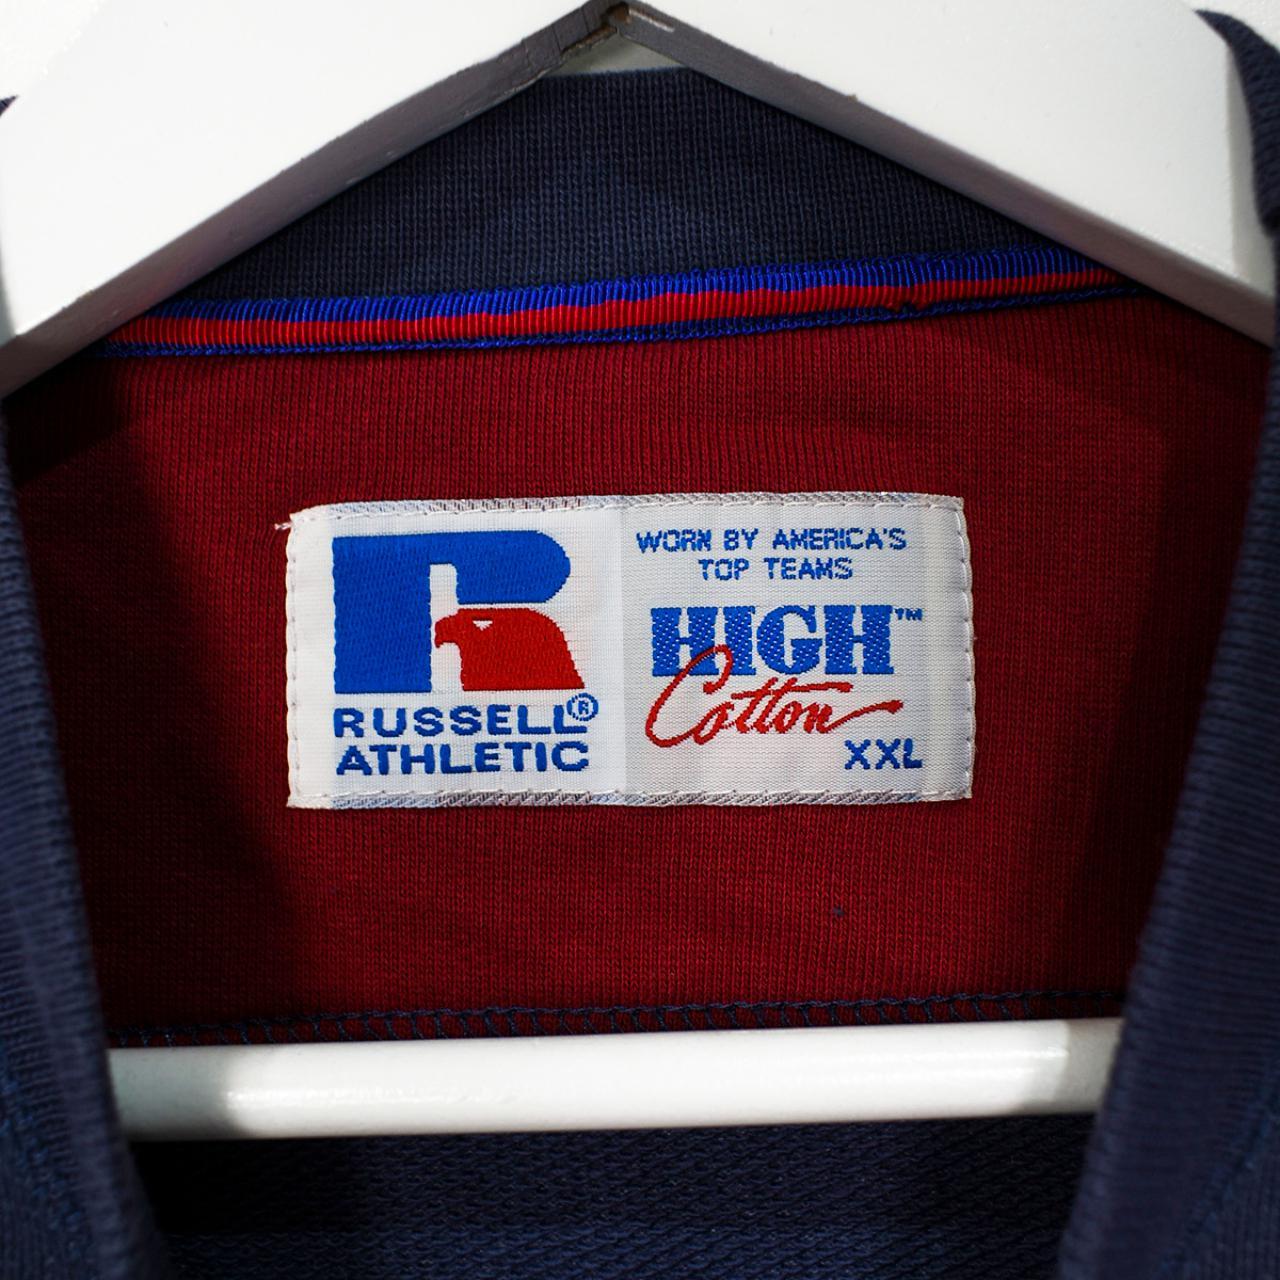 Product Image 4 - Russell Athletic Sweatshirt

Condition:  Very